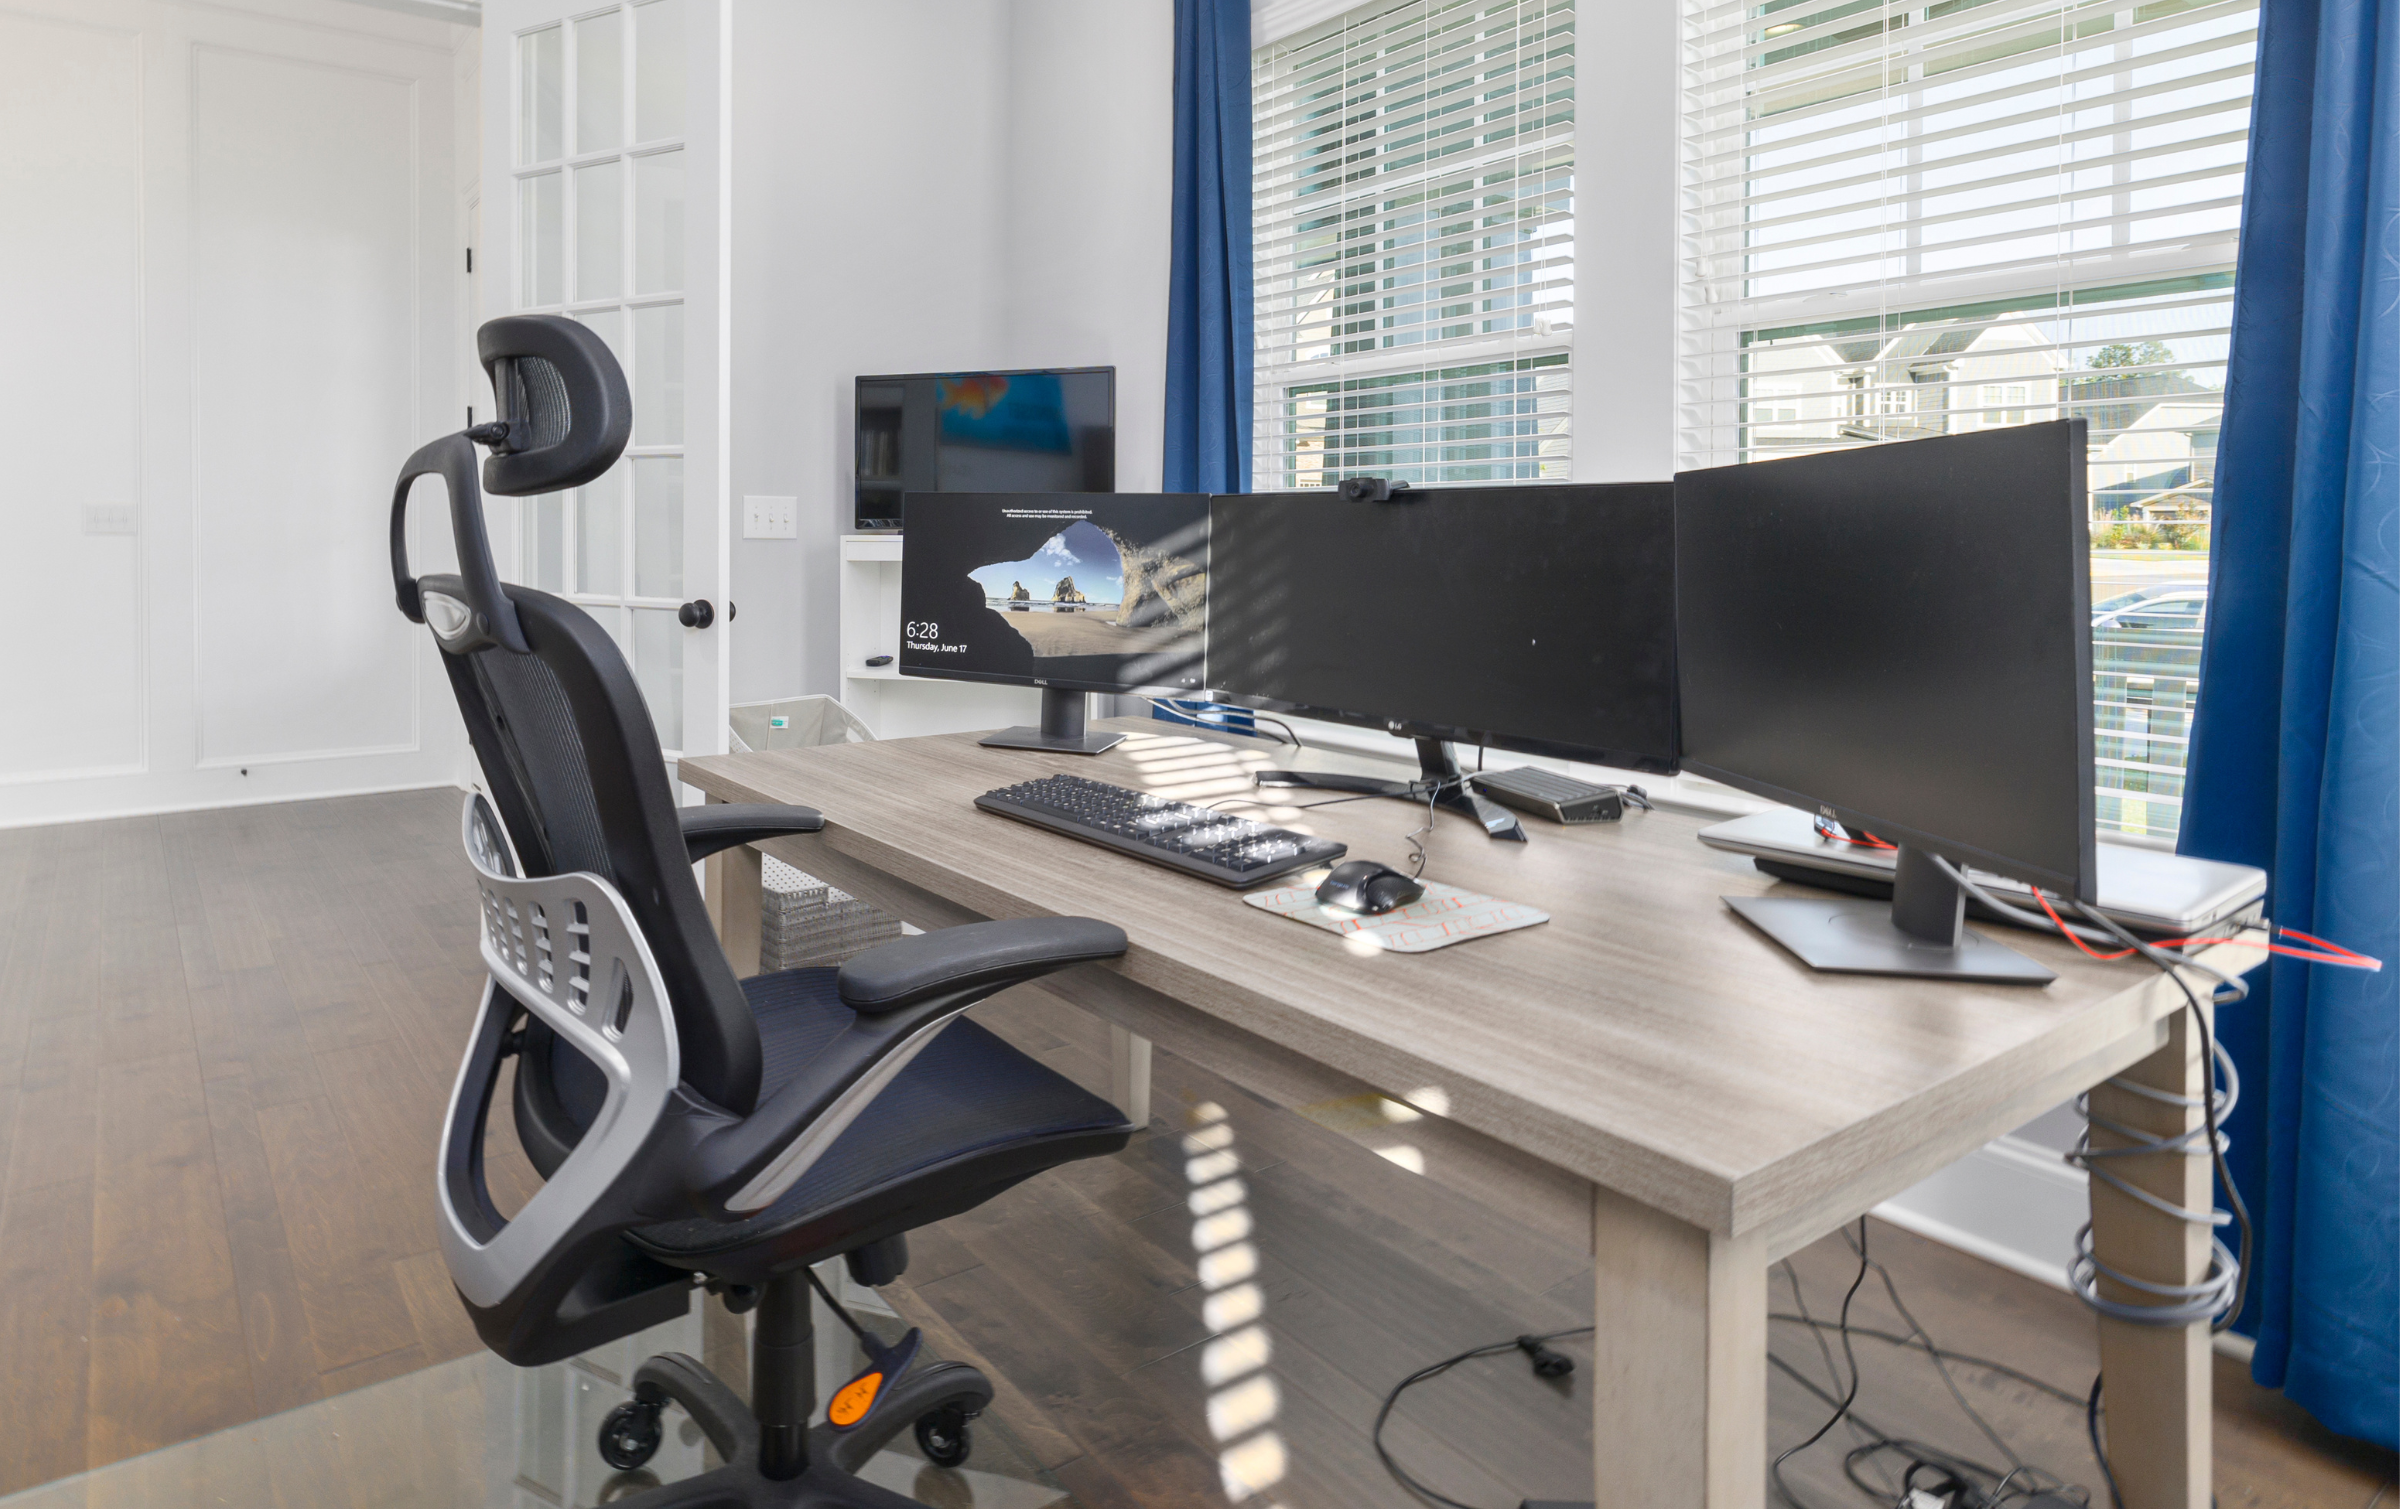 Ergonomic office chair at workstation